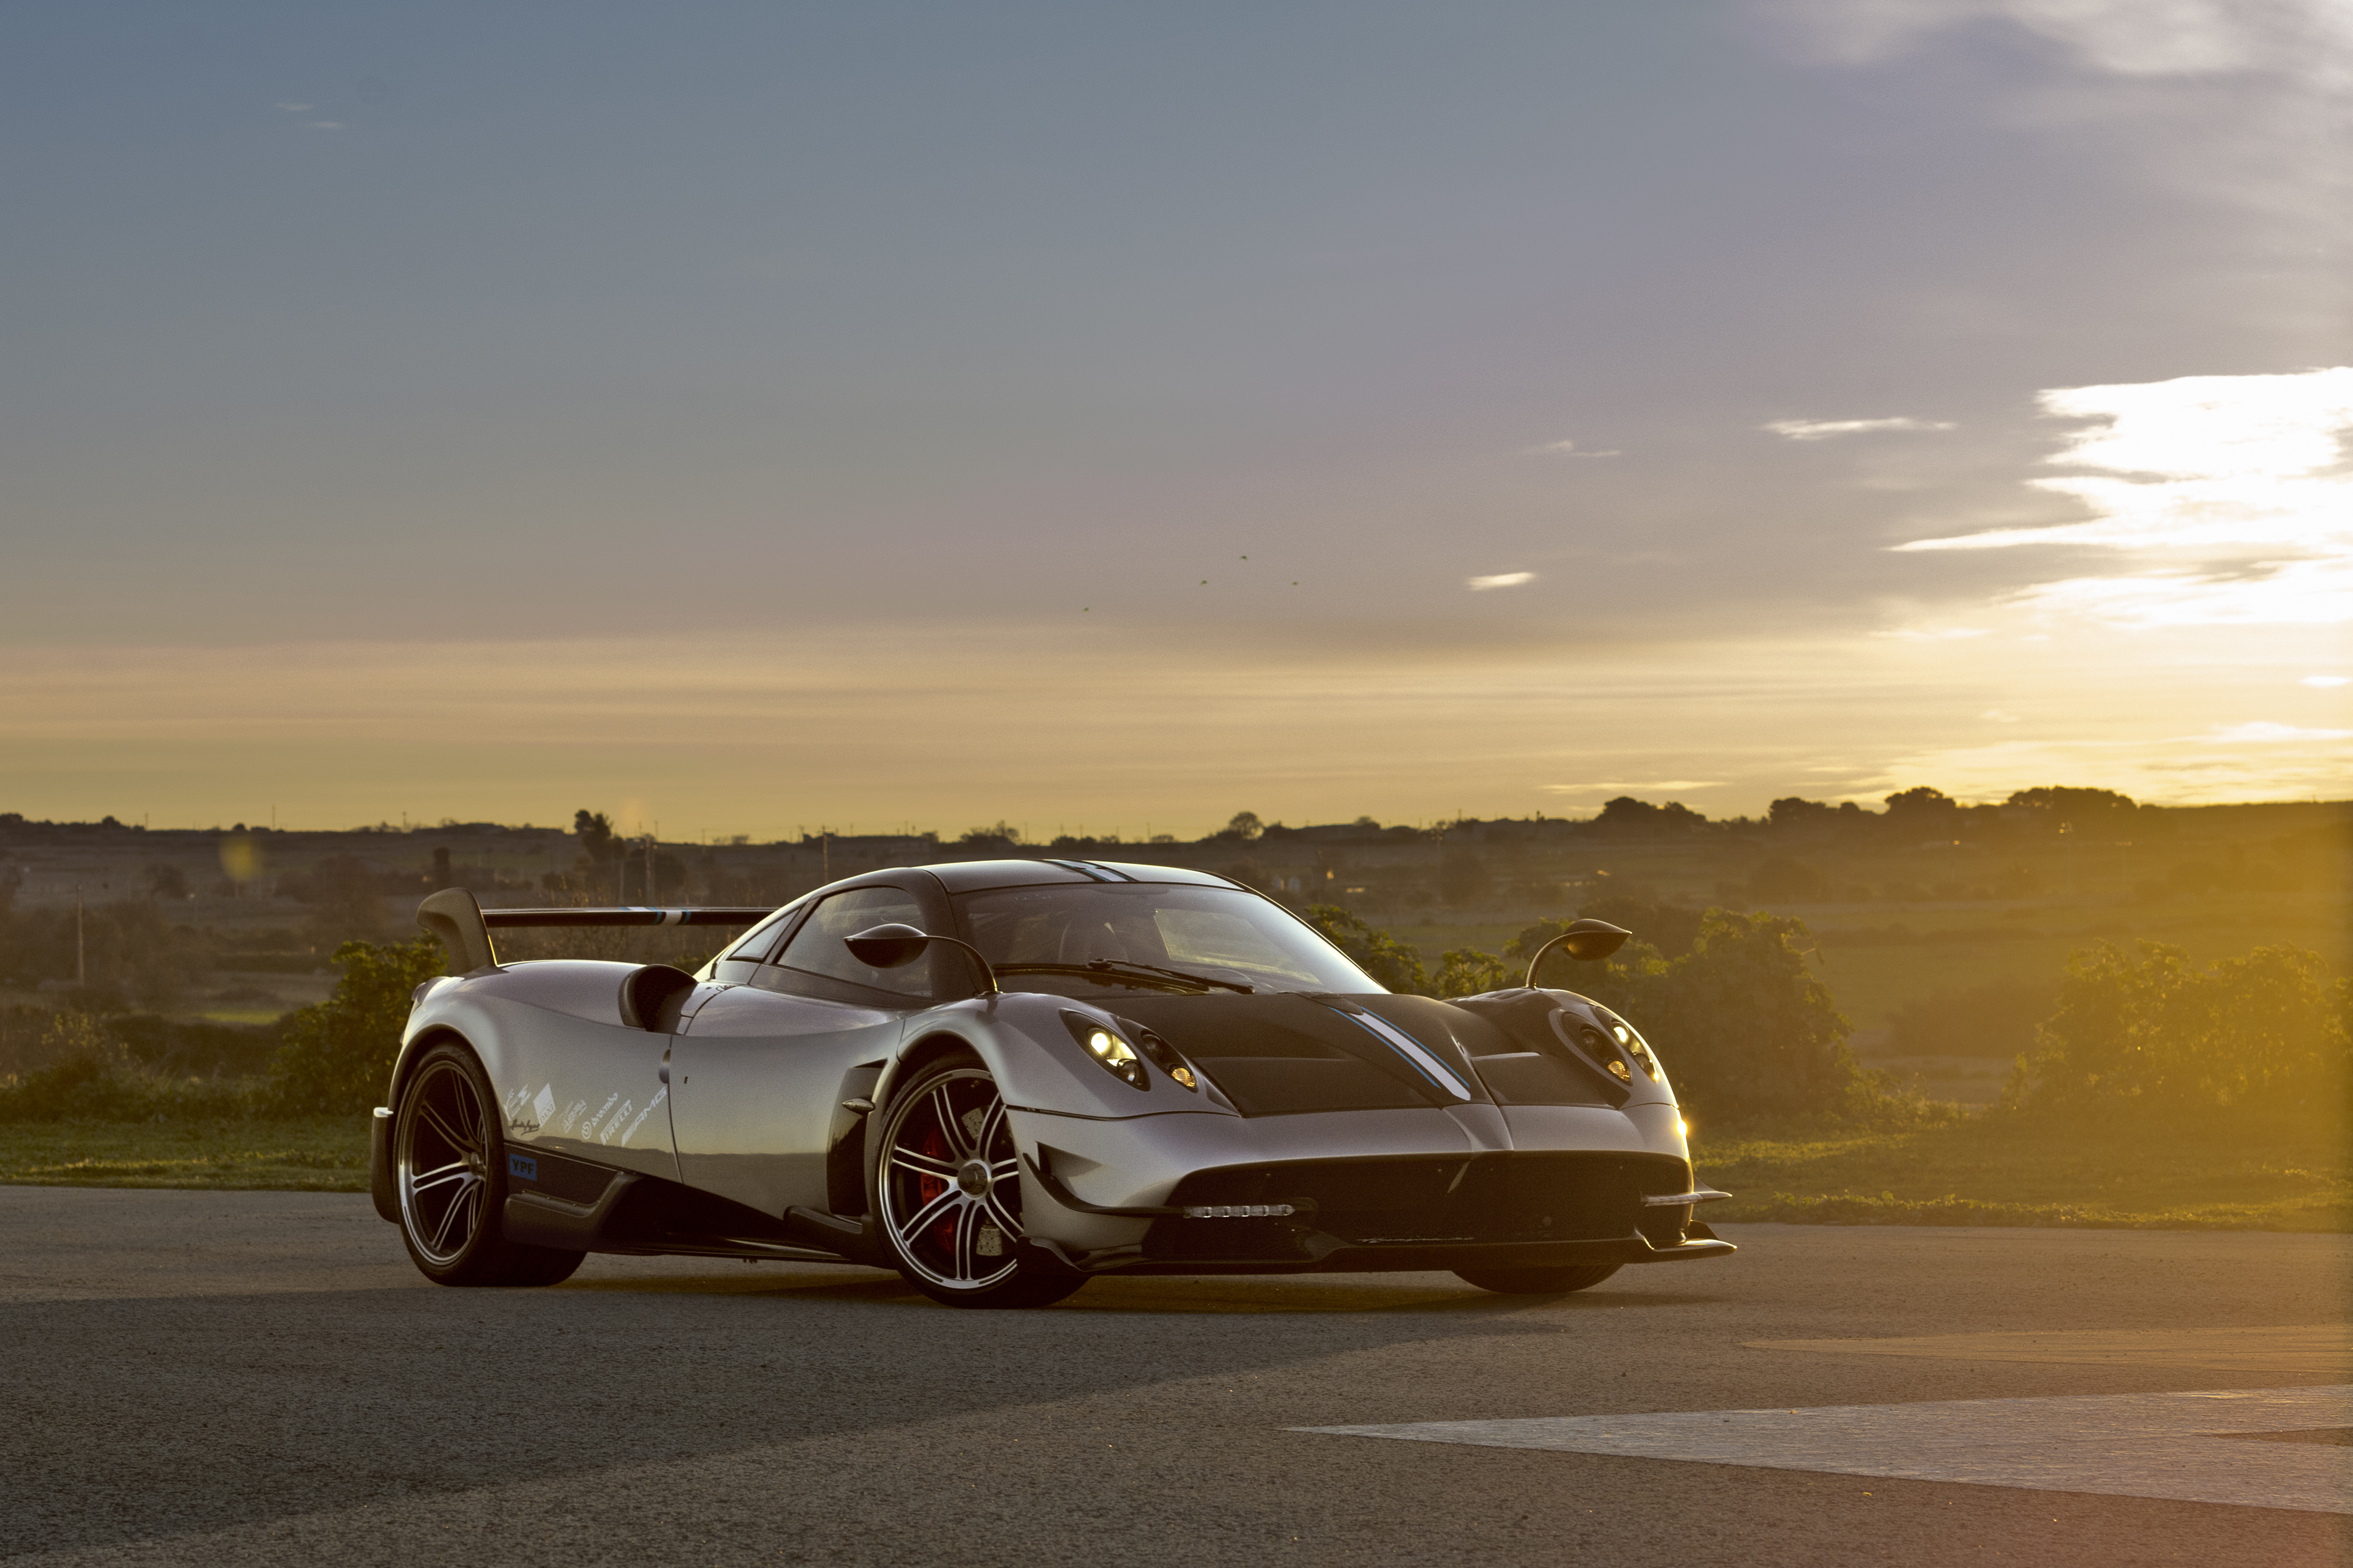 127276 Screensavers and Wallpapers Pagani for phone. Download pagani, cars, road, side view, huayra pictures for free